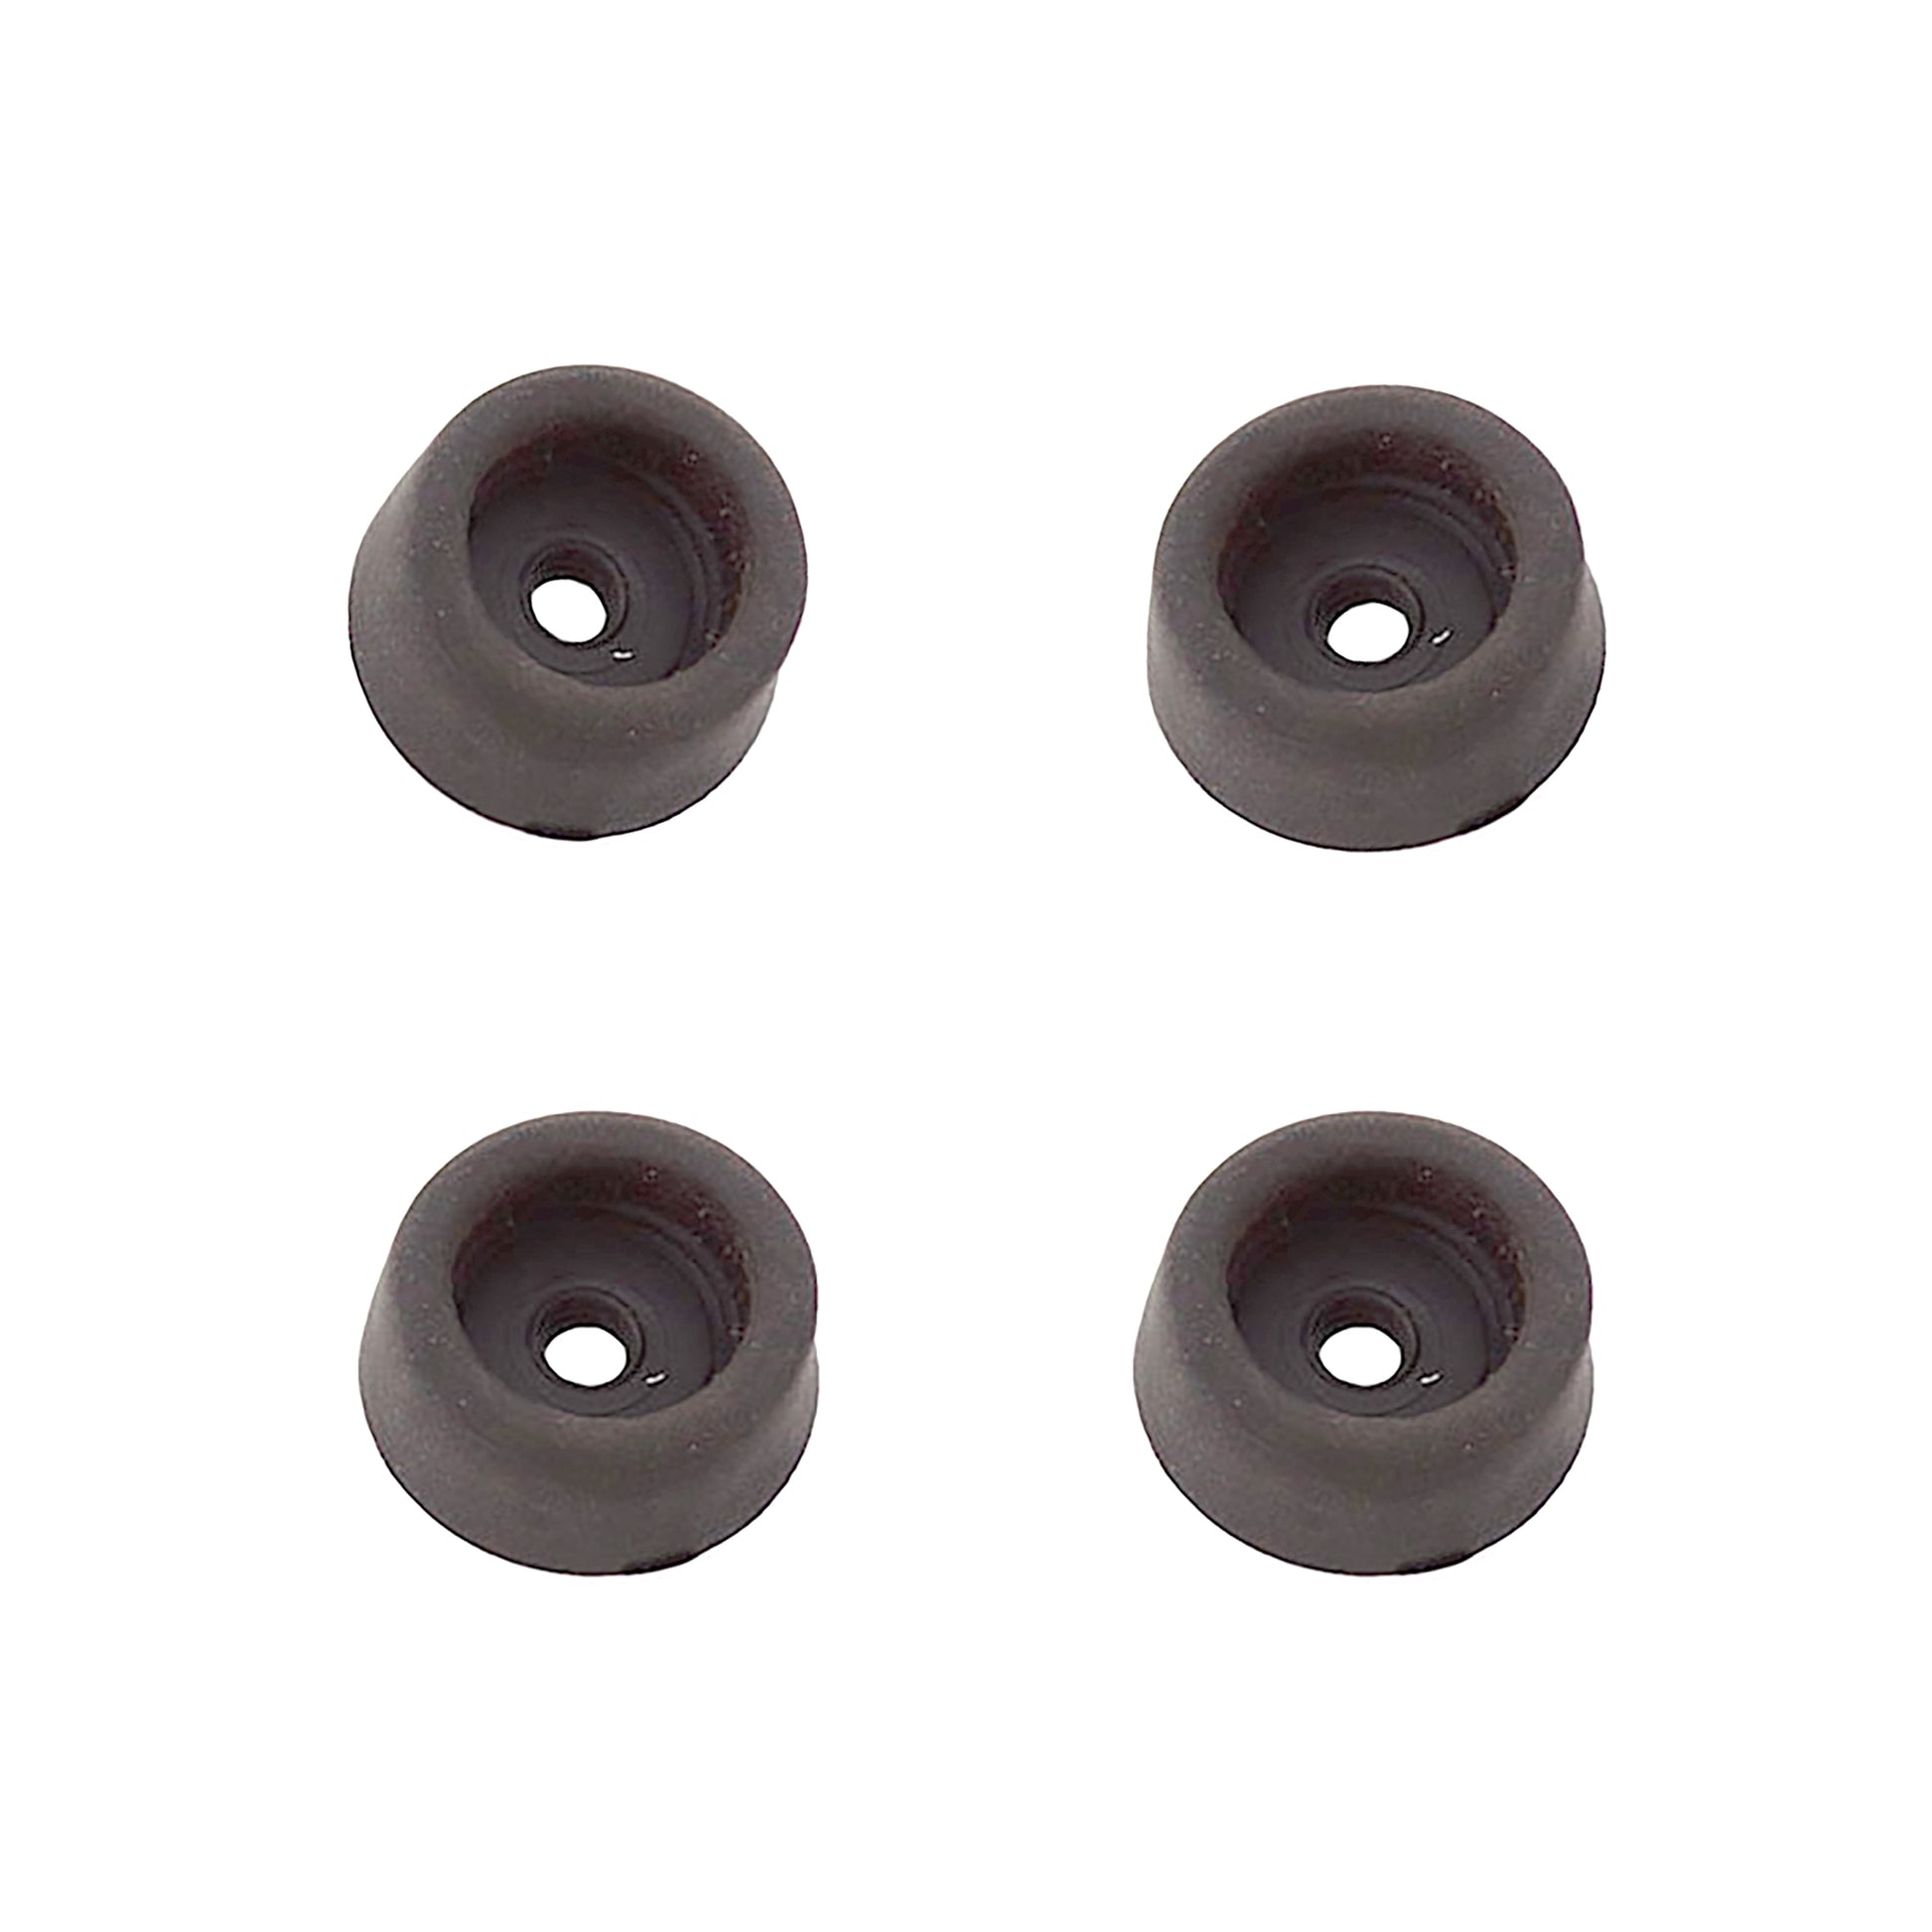 Rubber Feet for Standable Blower for BR-282A Inflatable Blower